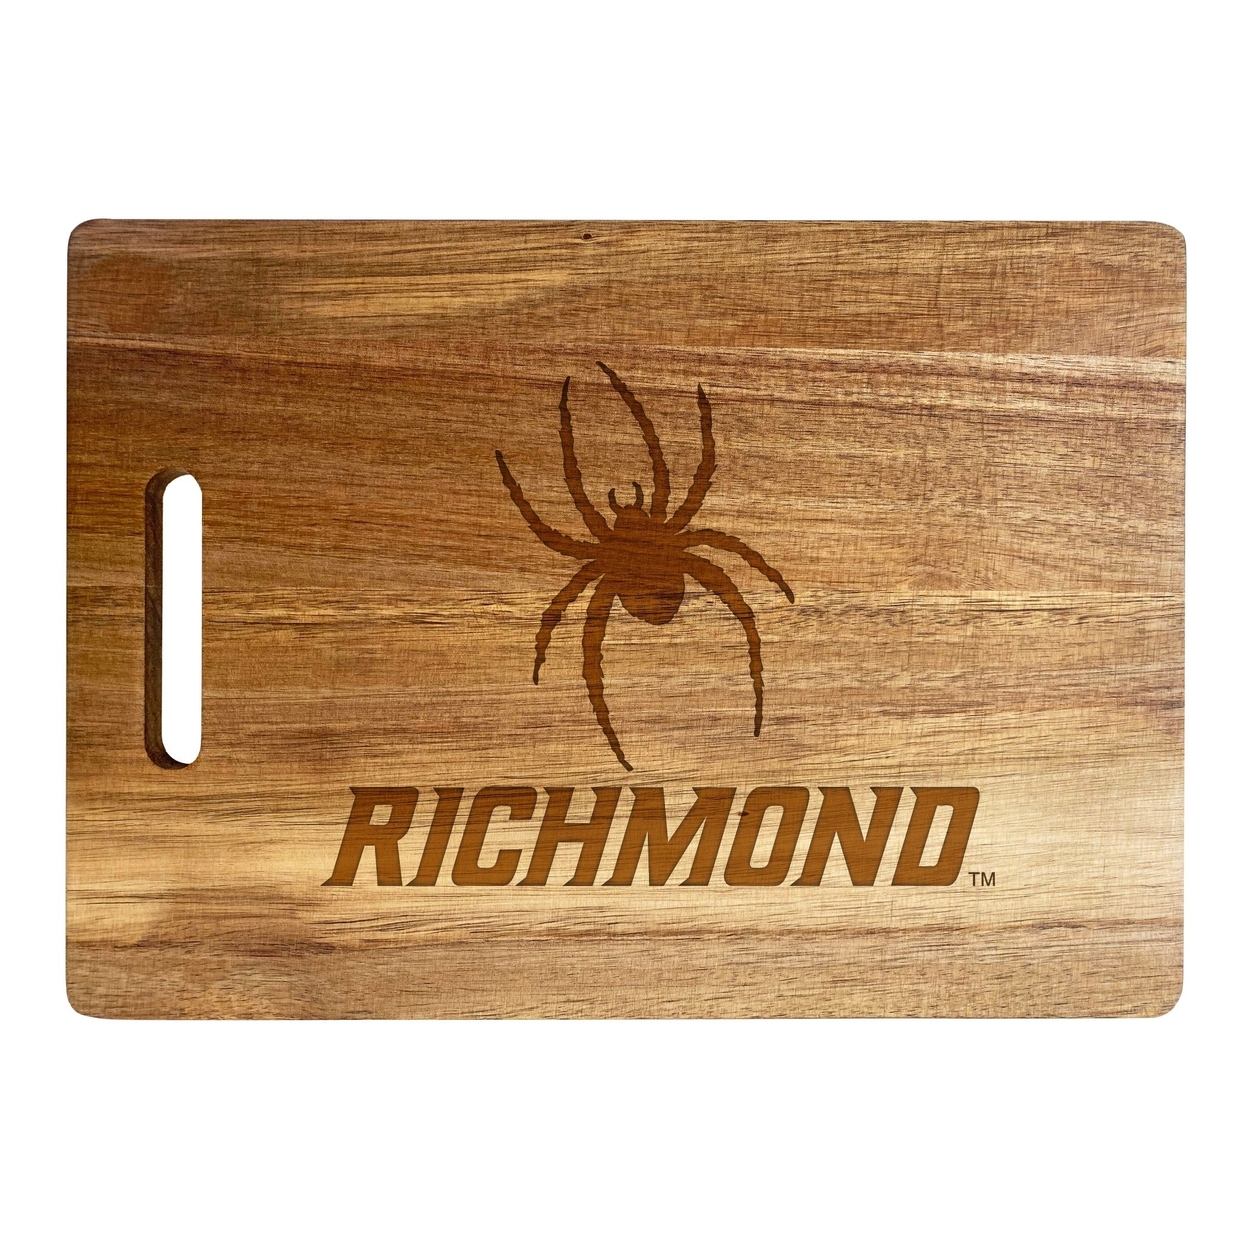 Richmond Spiders Engraved Wooden Cutting Board 10 X 14 Acacia Wood - Large Engraving